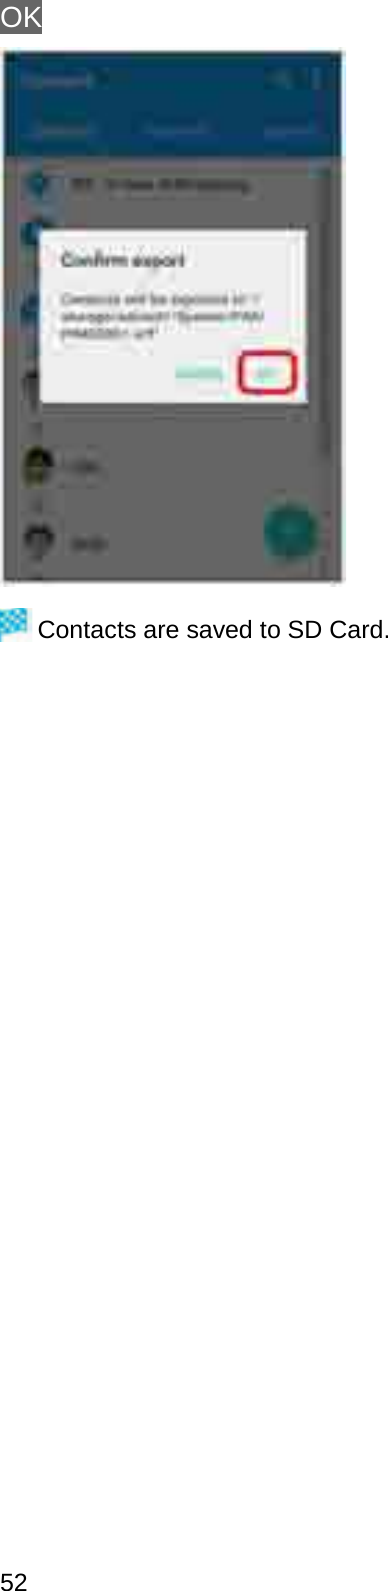 OKContacts are saved to SD Card.52